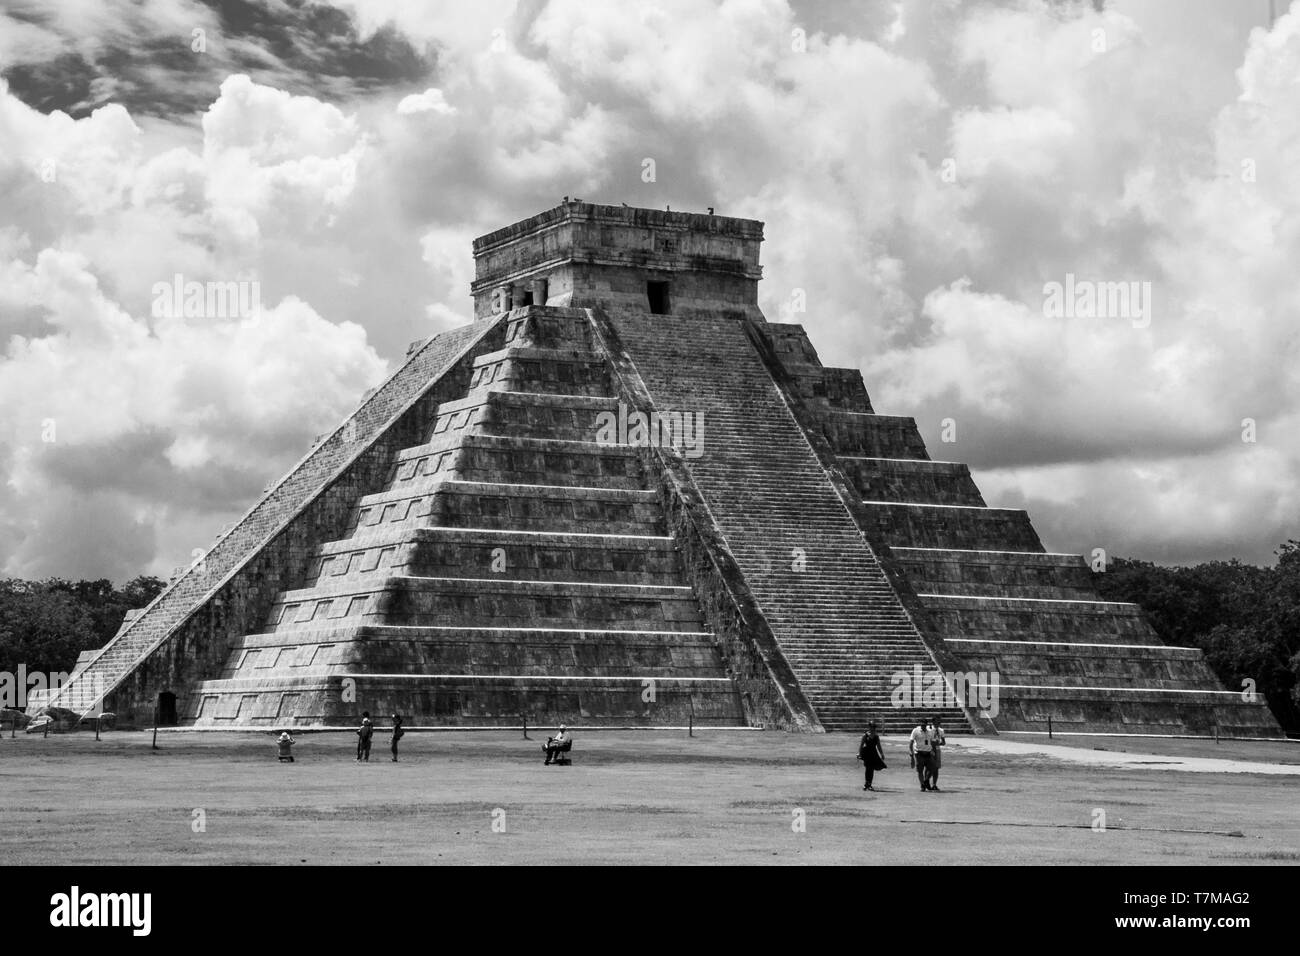 Chichen ItzÃ¡ is an archaeological zone of Mexico in the state of Yucatan. One of the most important cities of the Maya civilization, Chichen ItzÃ¡, i Stock Photo